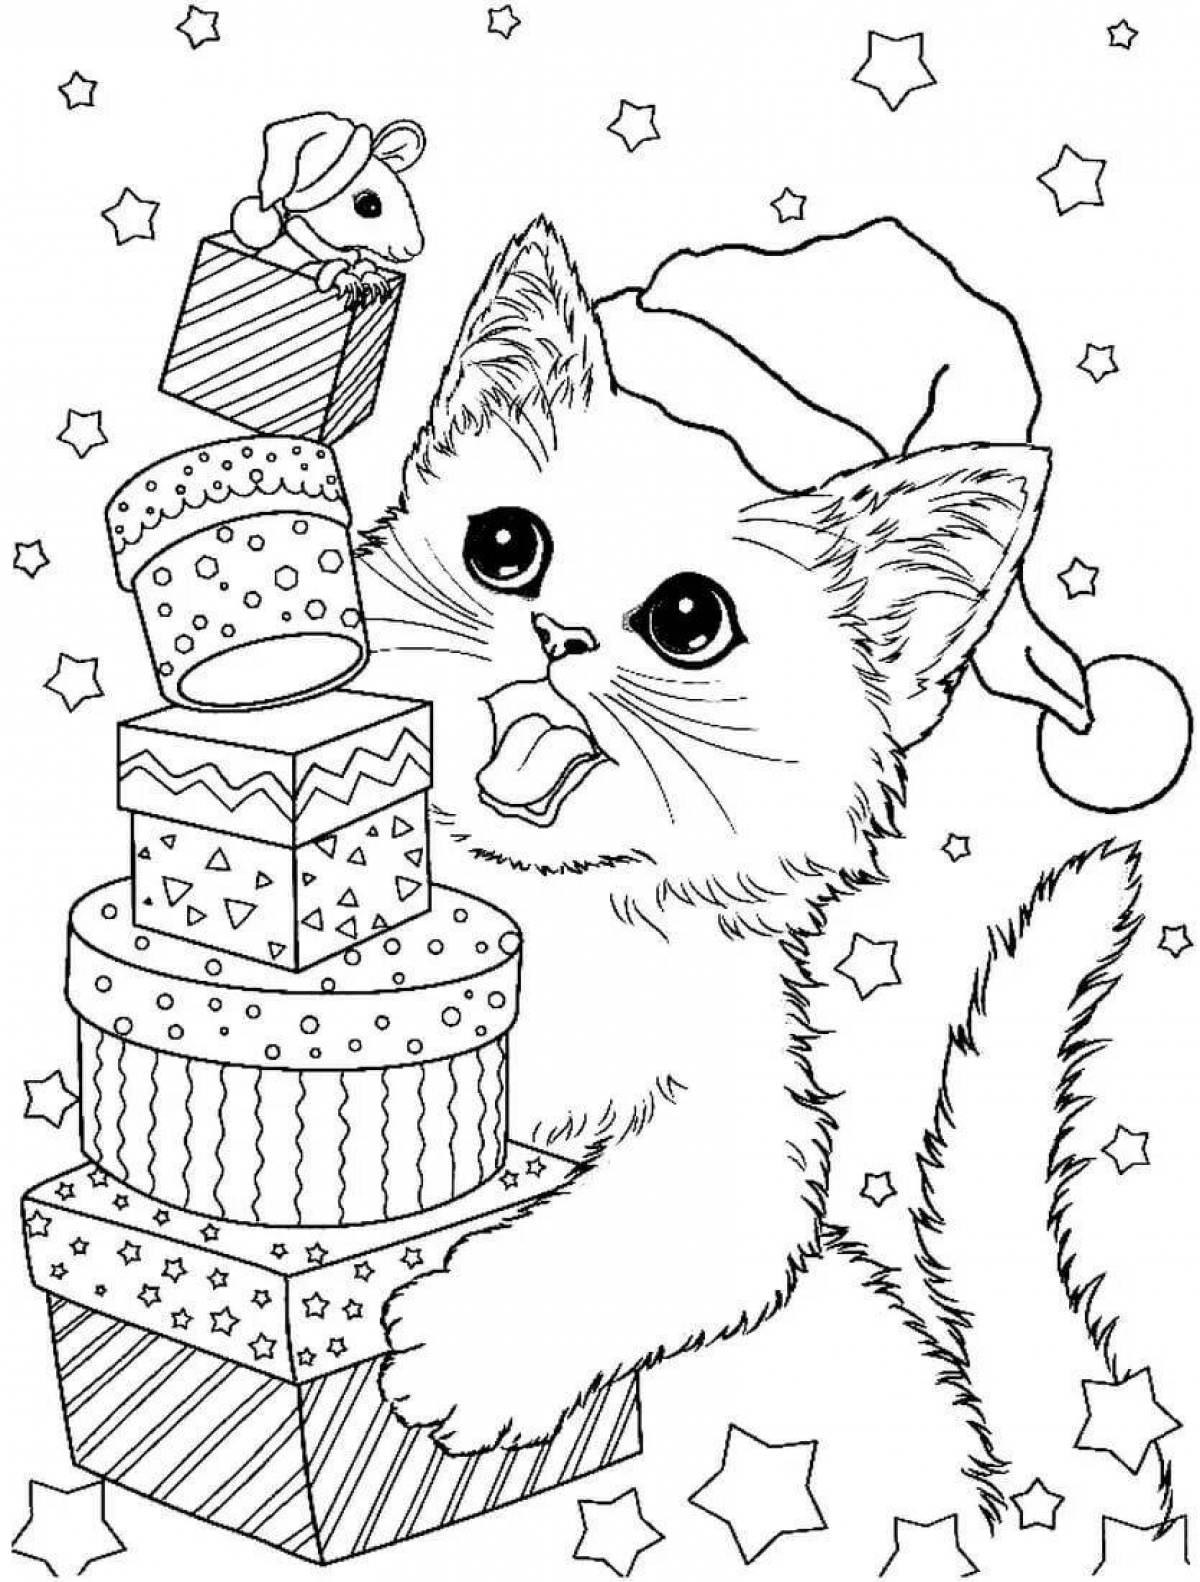 Lovely coloring book 9 years old for cat girls